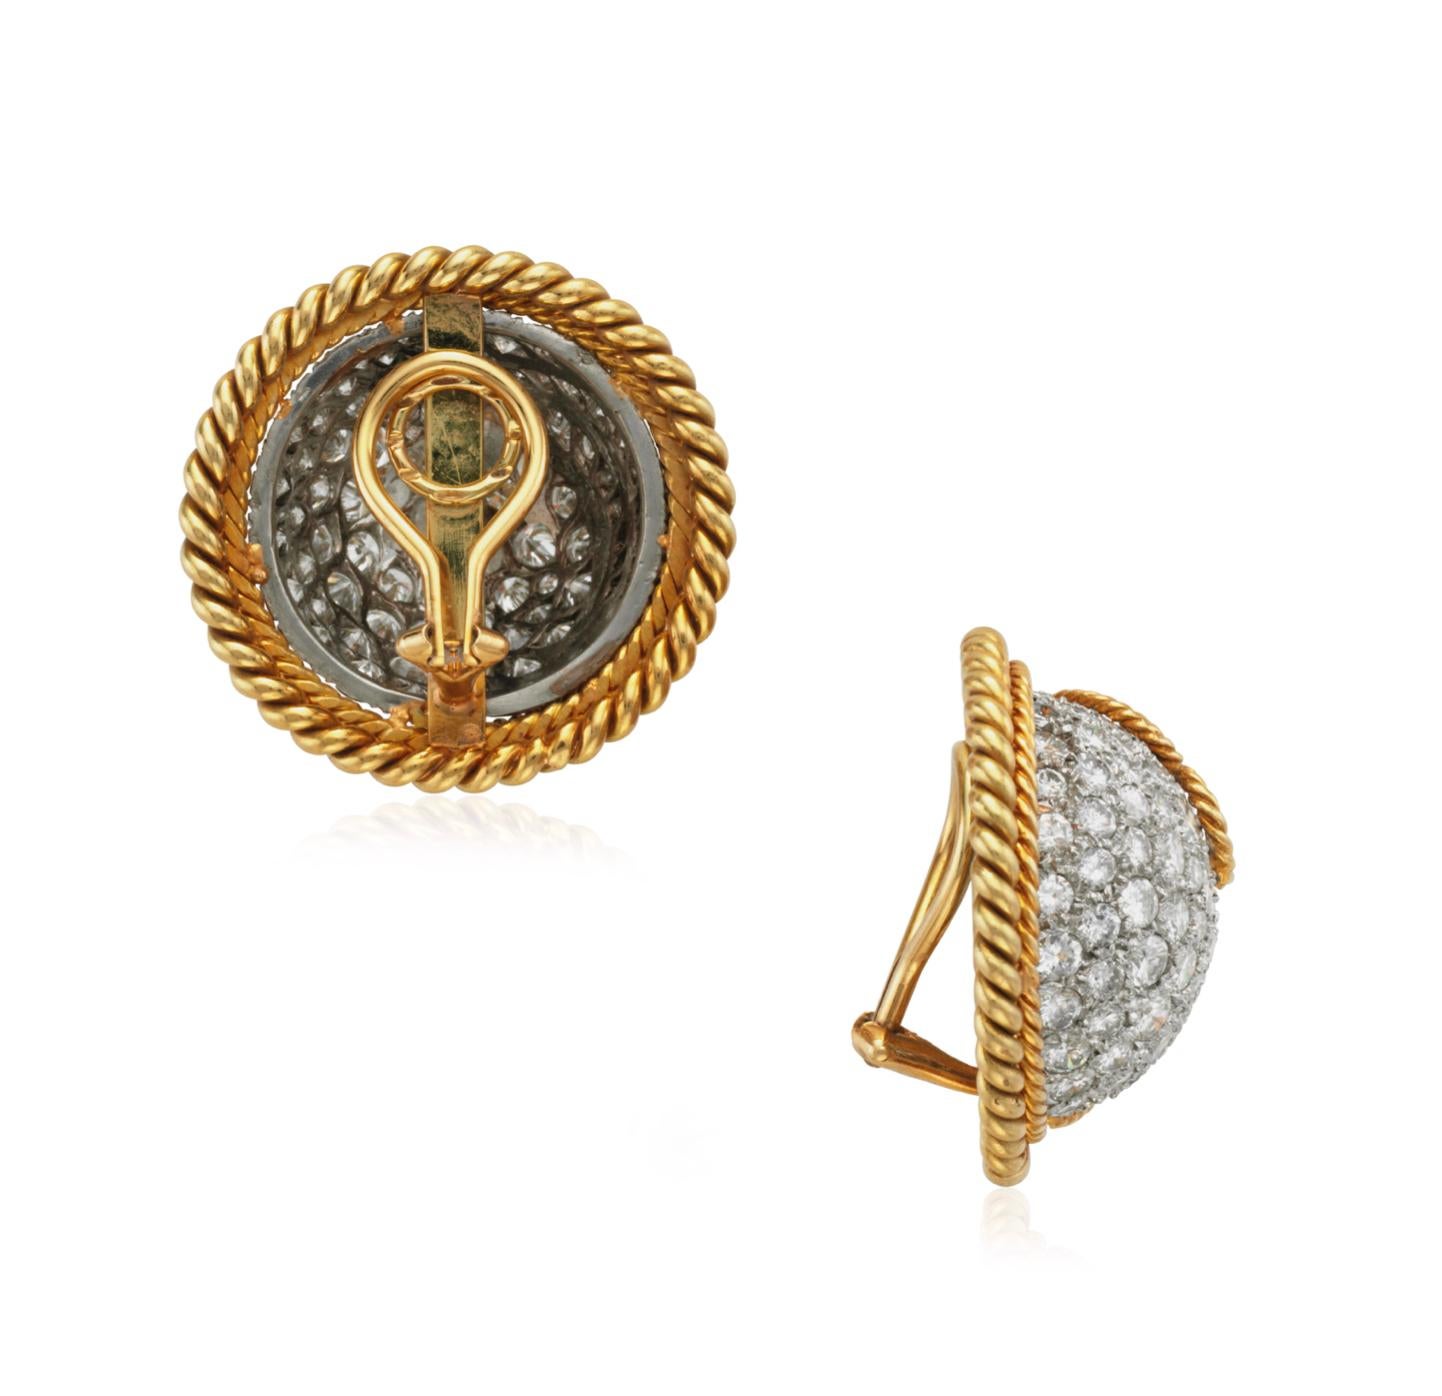 One pair of Platinum and 18 karat yellow gold earrings of bombe form, set with 166 round diamonds weighing approximately 5-6 carats. These earrings are roped with gold accents.